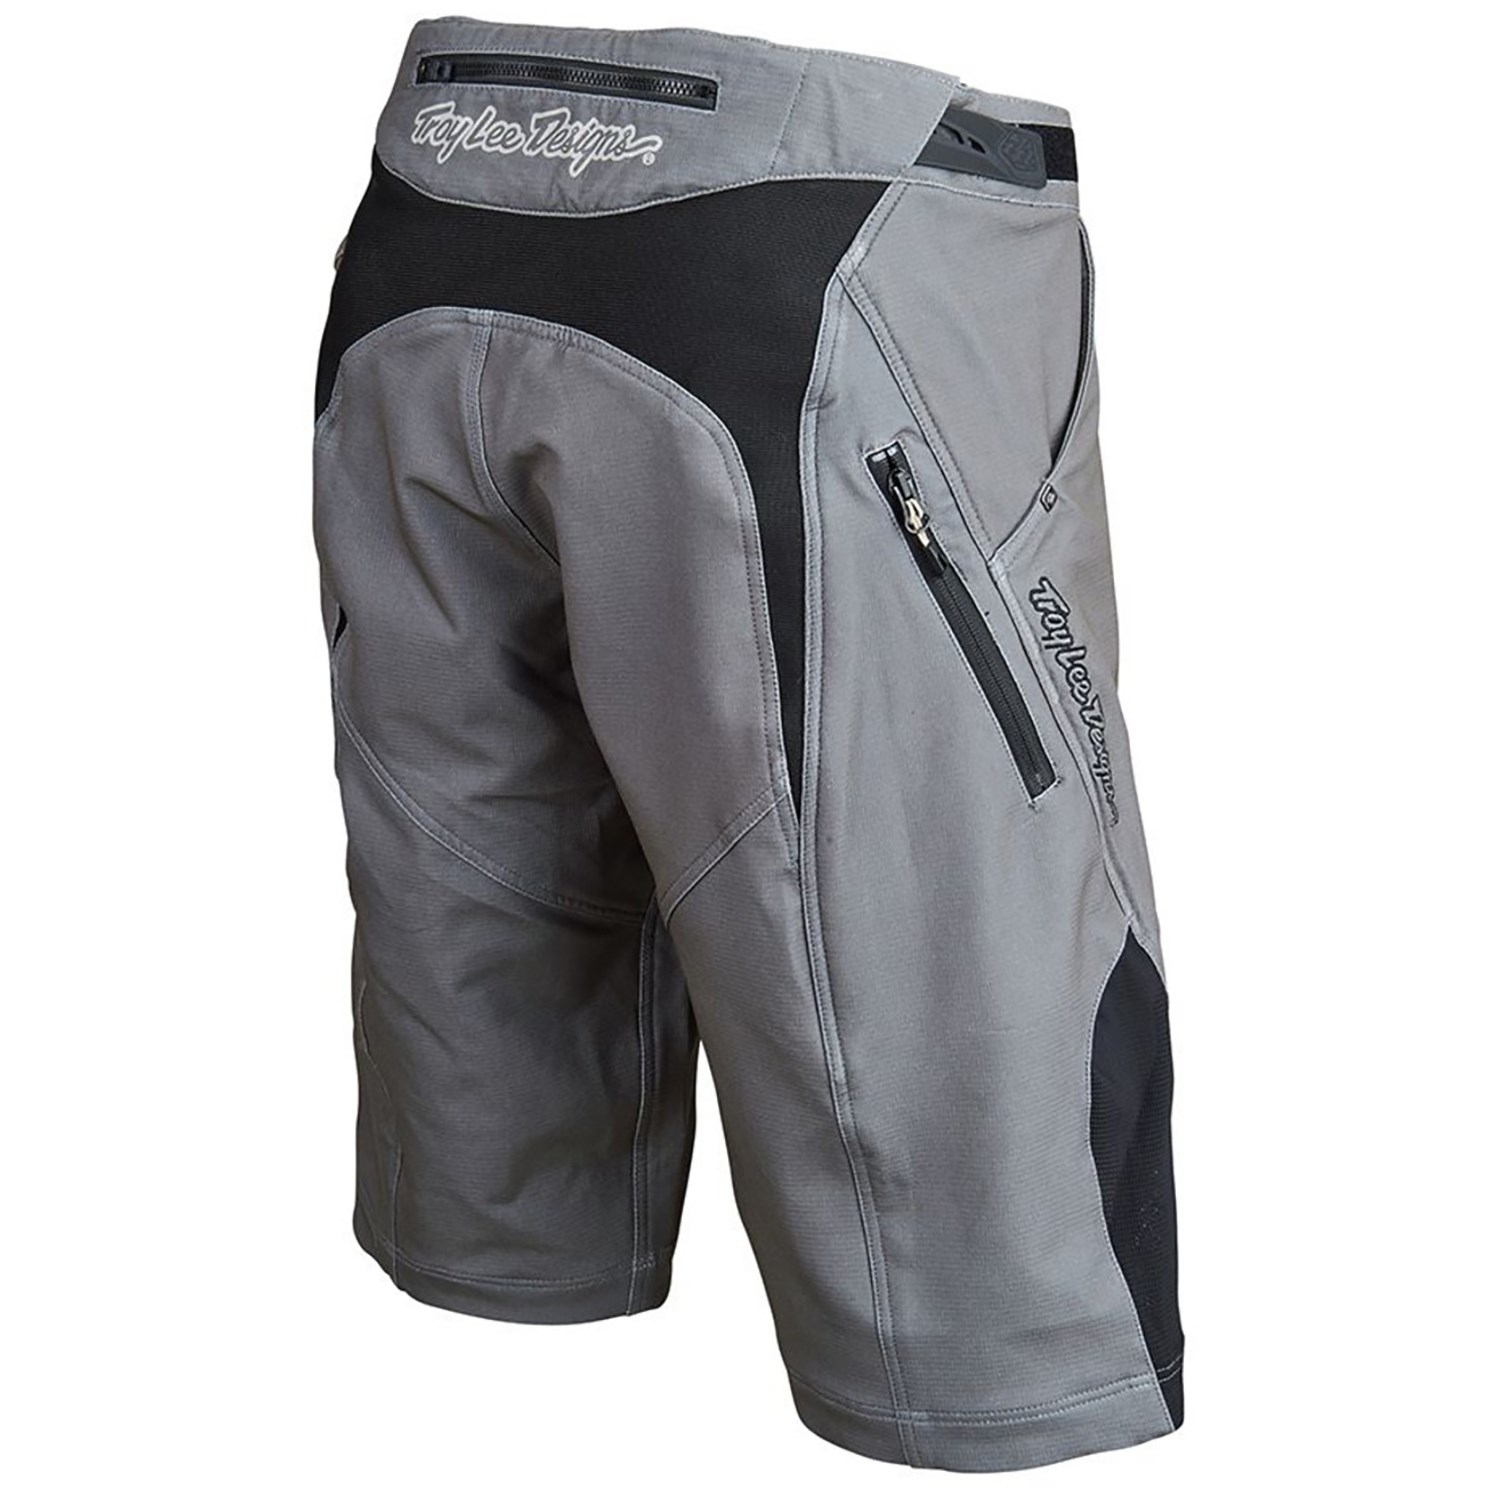 troy lee designs padded shorts